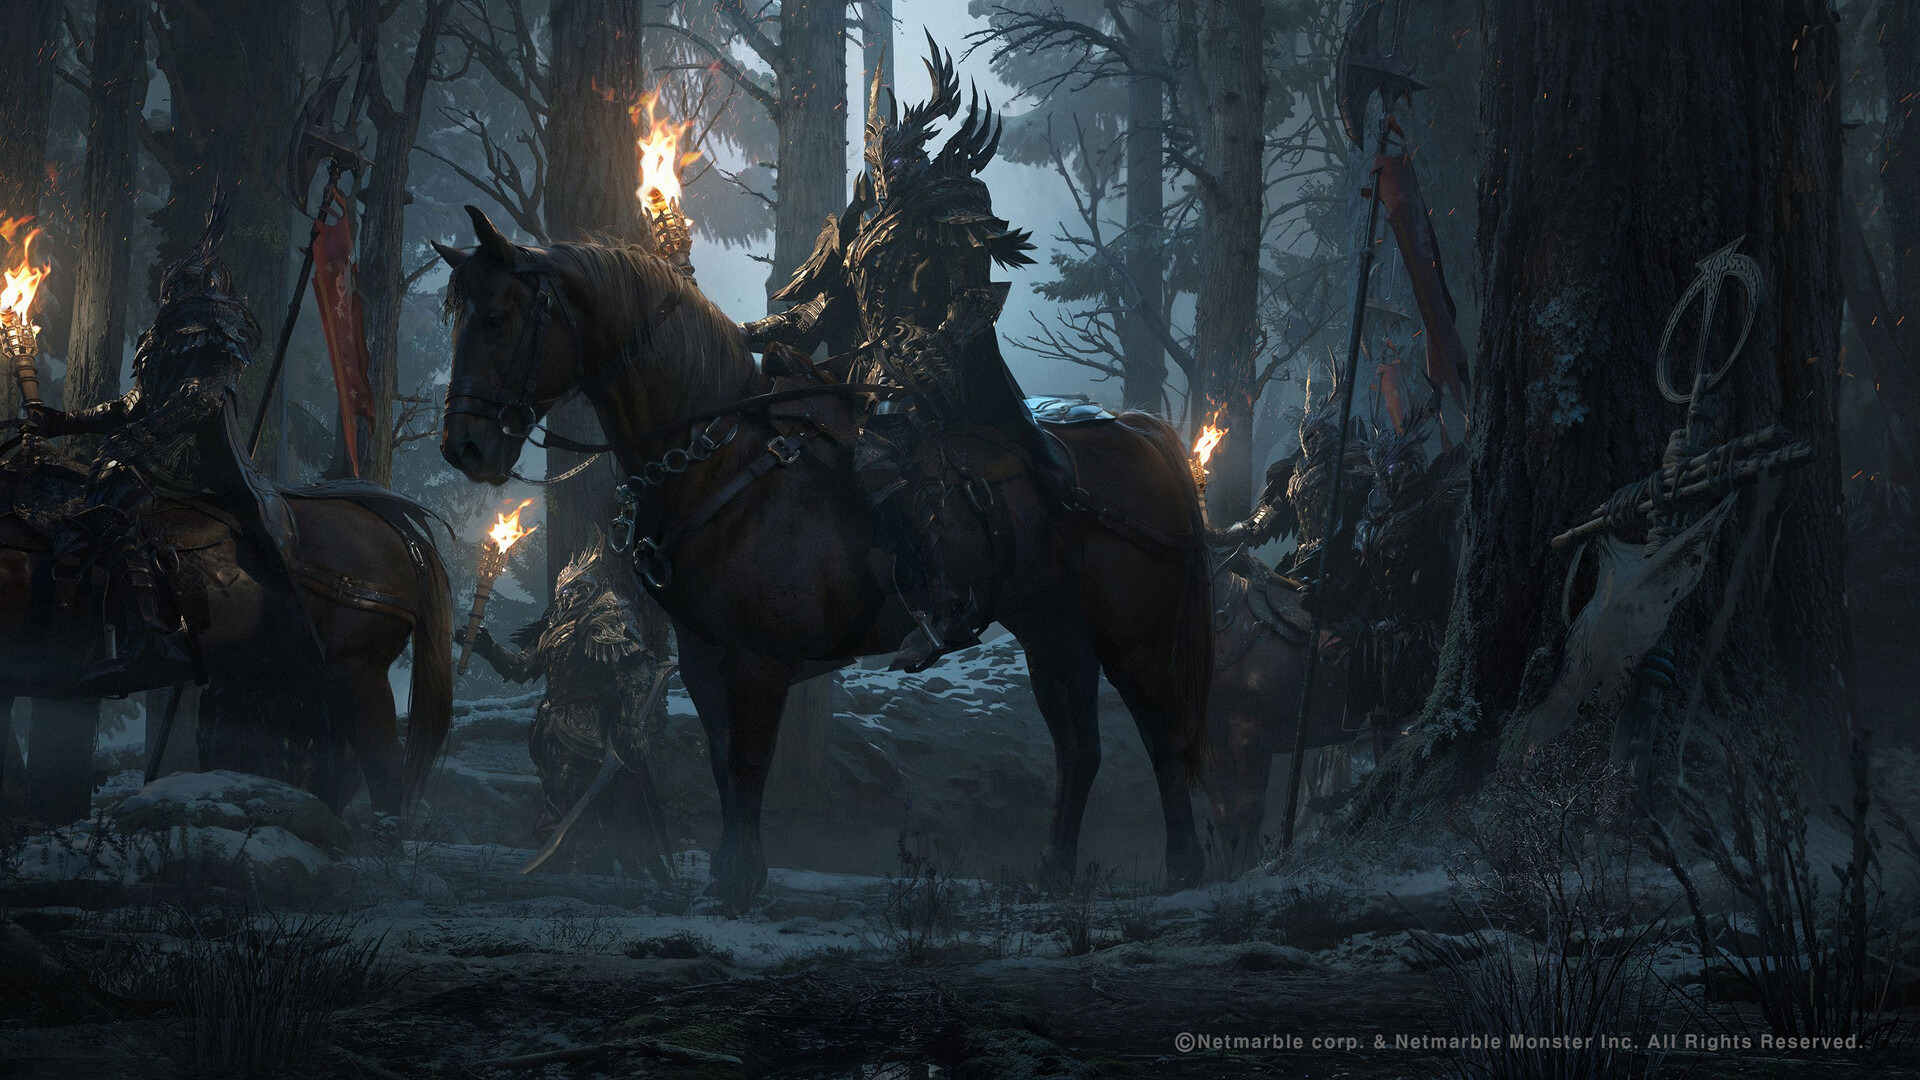 Daejeon Jang Drawing Warrior Armor Horse Torches Forest 1920x1080